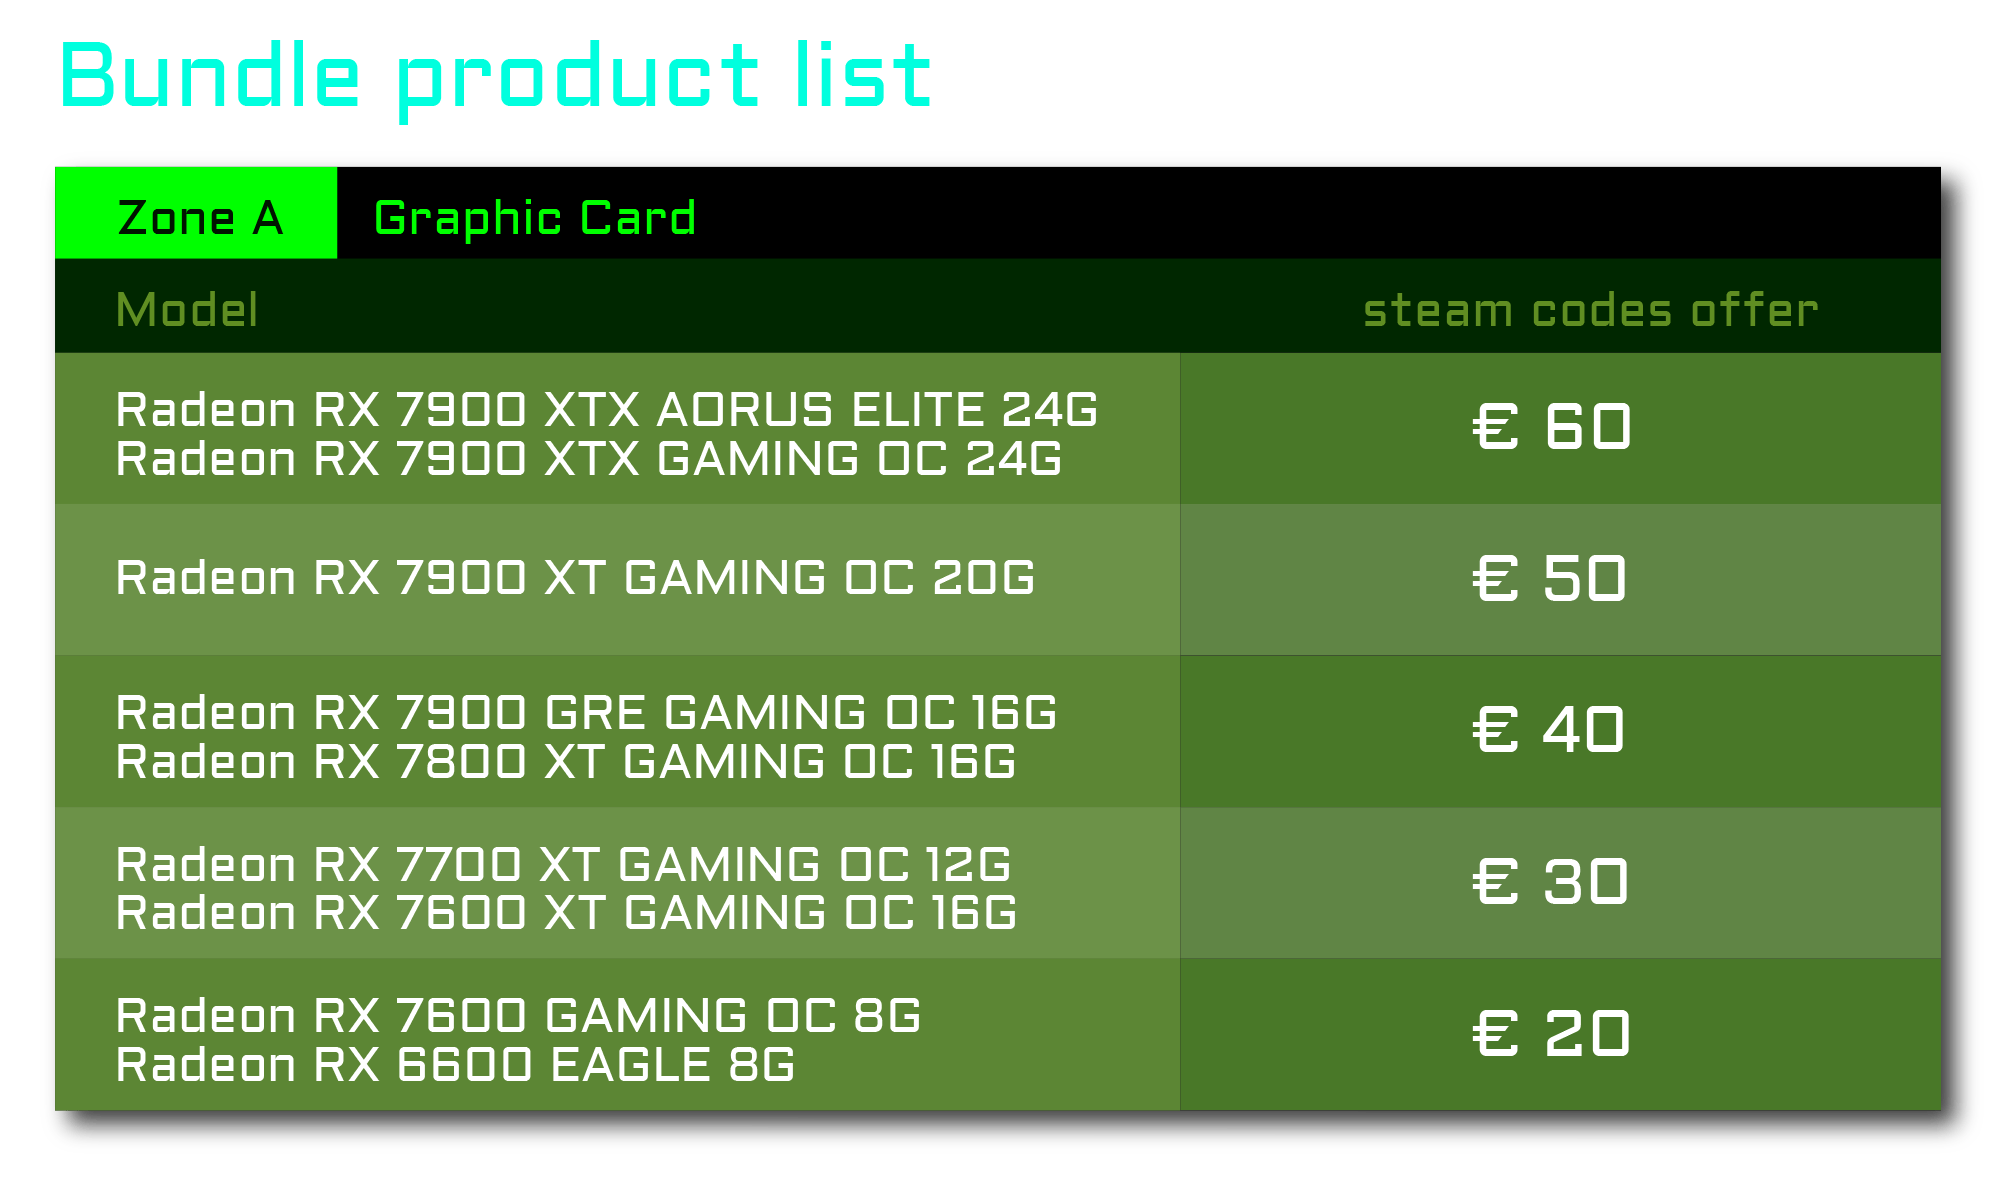 Bundle product list - Zone A - Graphic Card